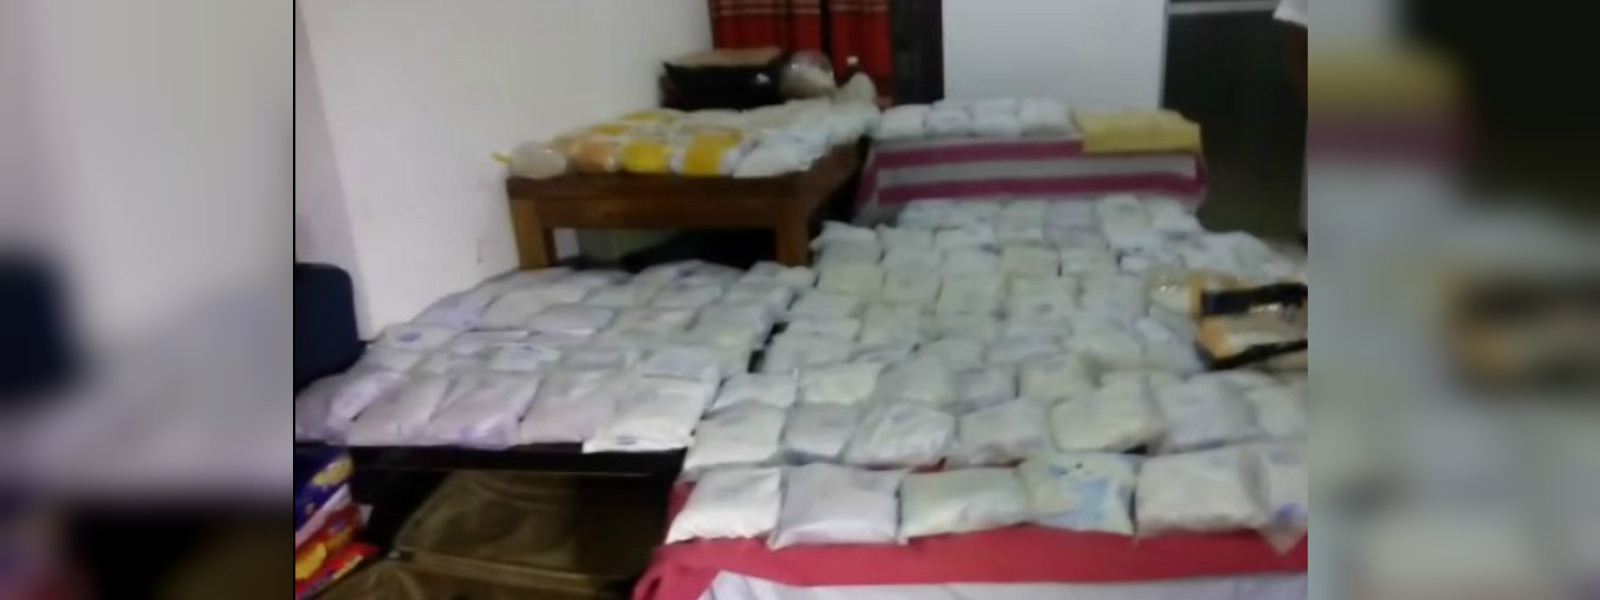 RECORD HAUL OF HEROIN IN THE HEART OF COLOMBO